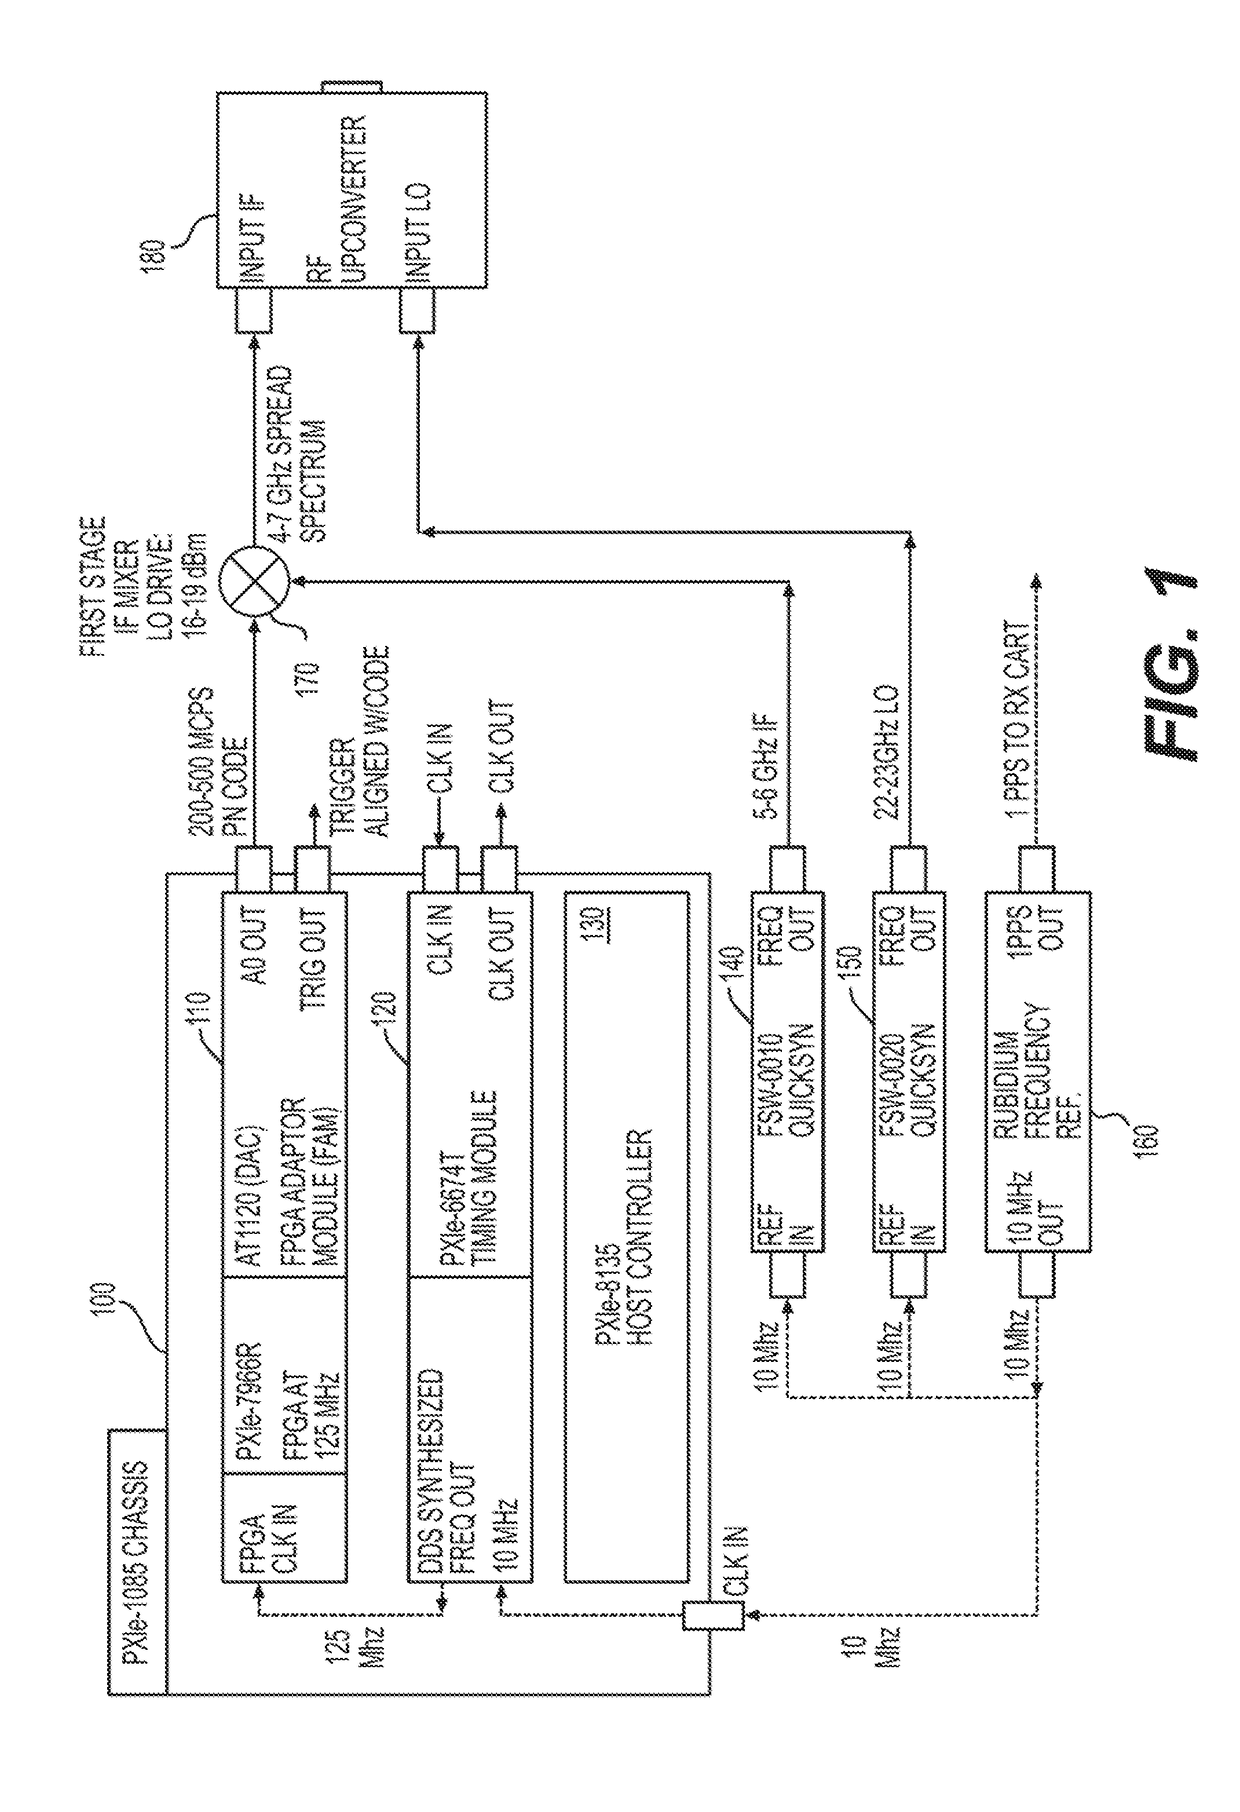 Systems, methods, and computer-accessible media for measuring or modeling a wideband, millimeter-wave channel and methods and systems for calibrating same